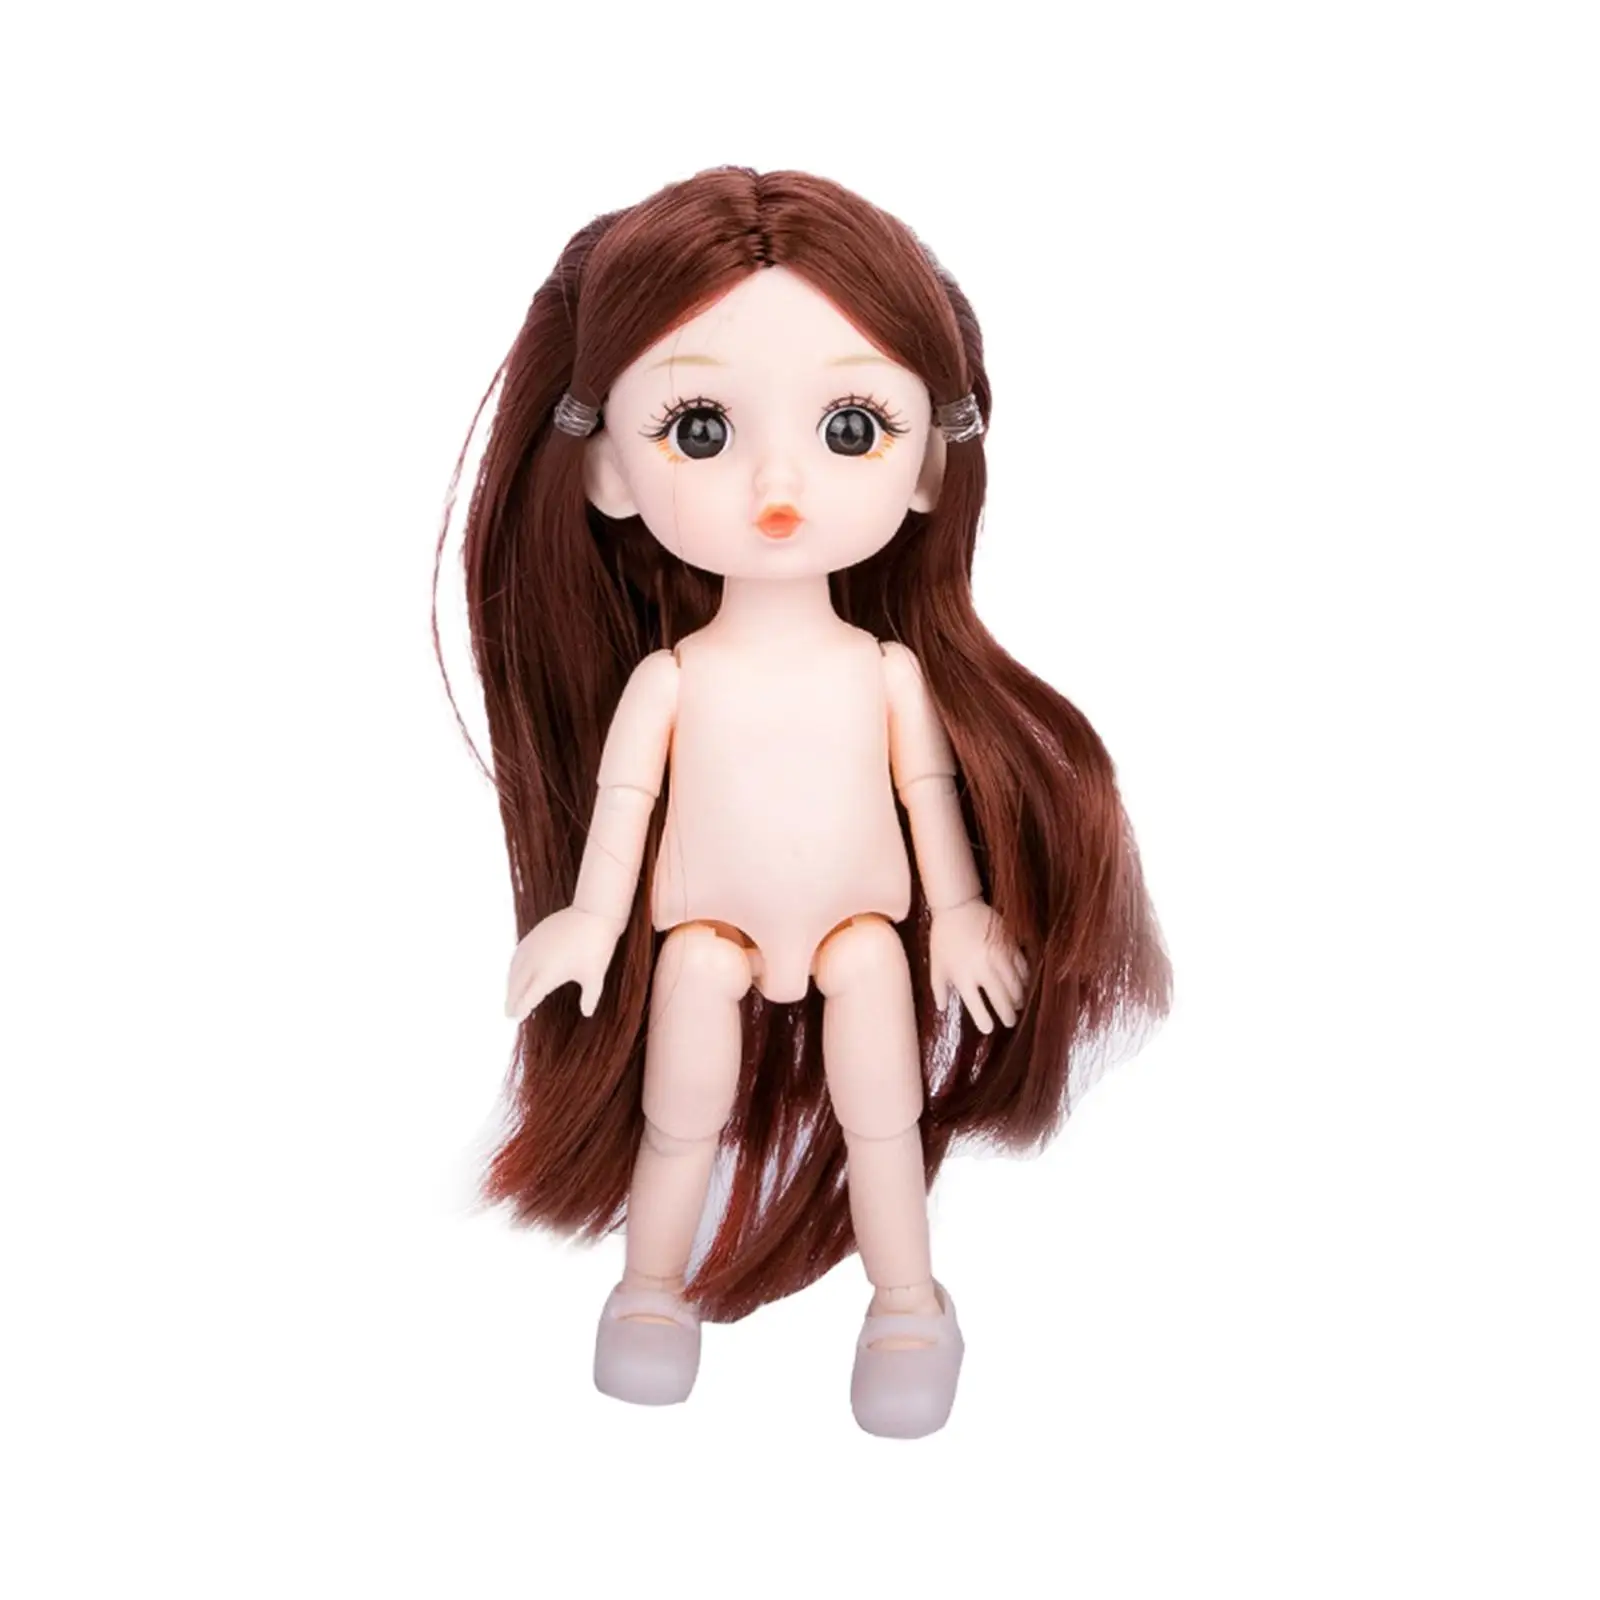 Fashion Fashion Doll Moveable Joints DIY Dolls Toy Big Eyes and Princess Doll Smooth Hair 3D Eyes for Pretend Play Gifts Toy